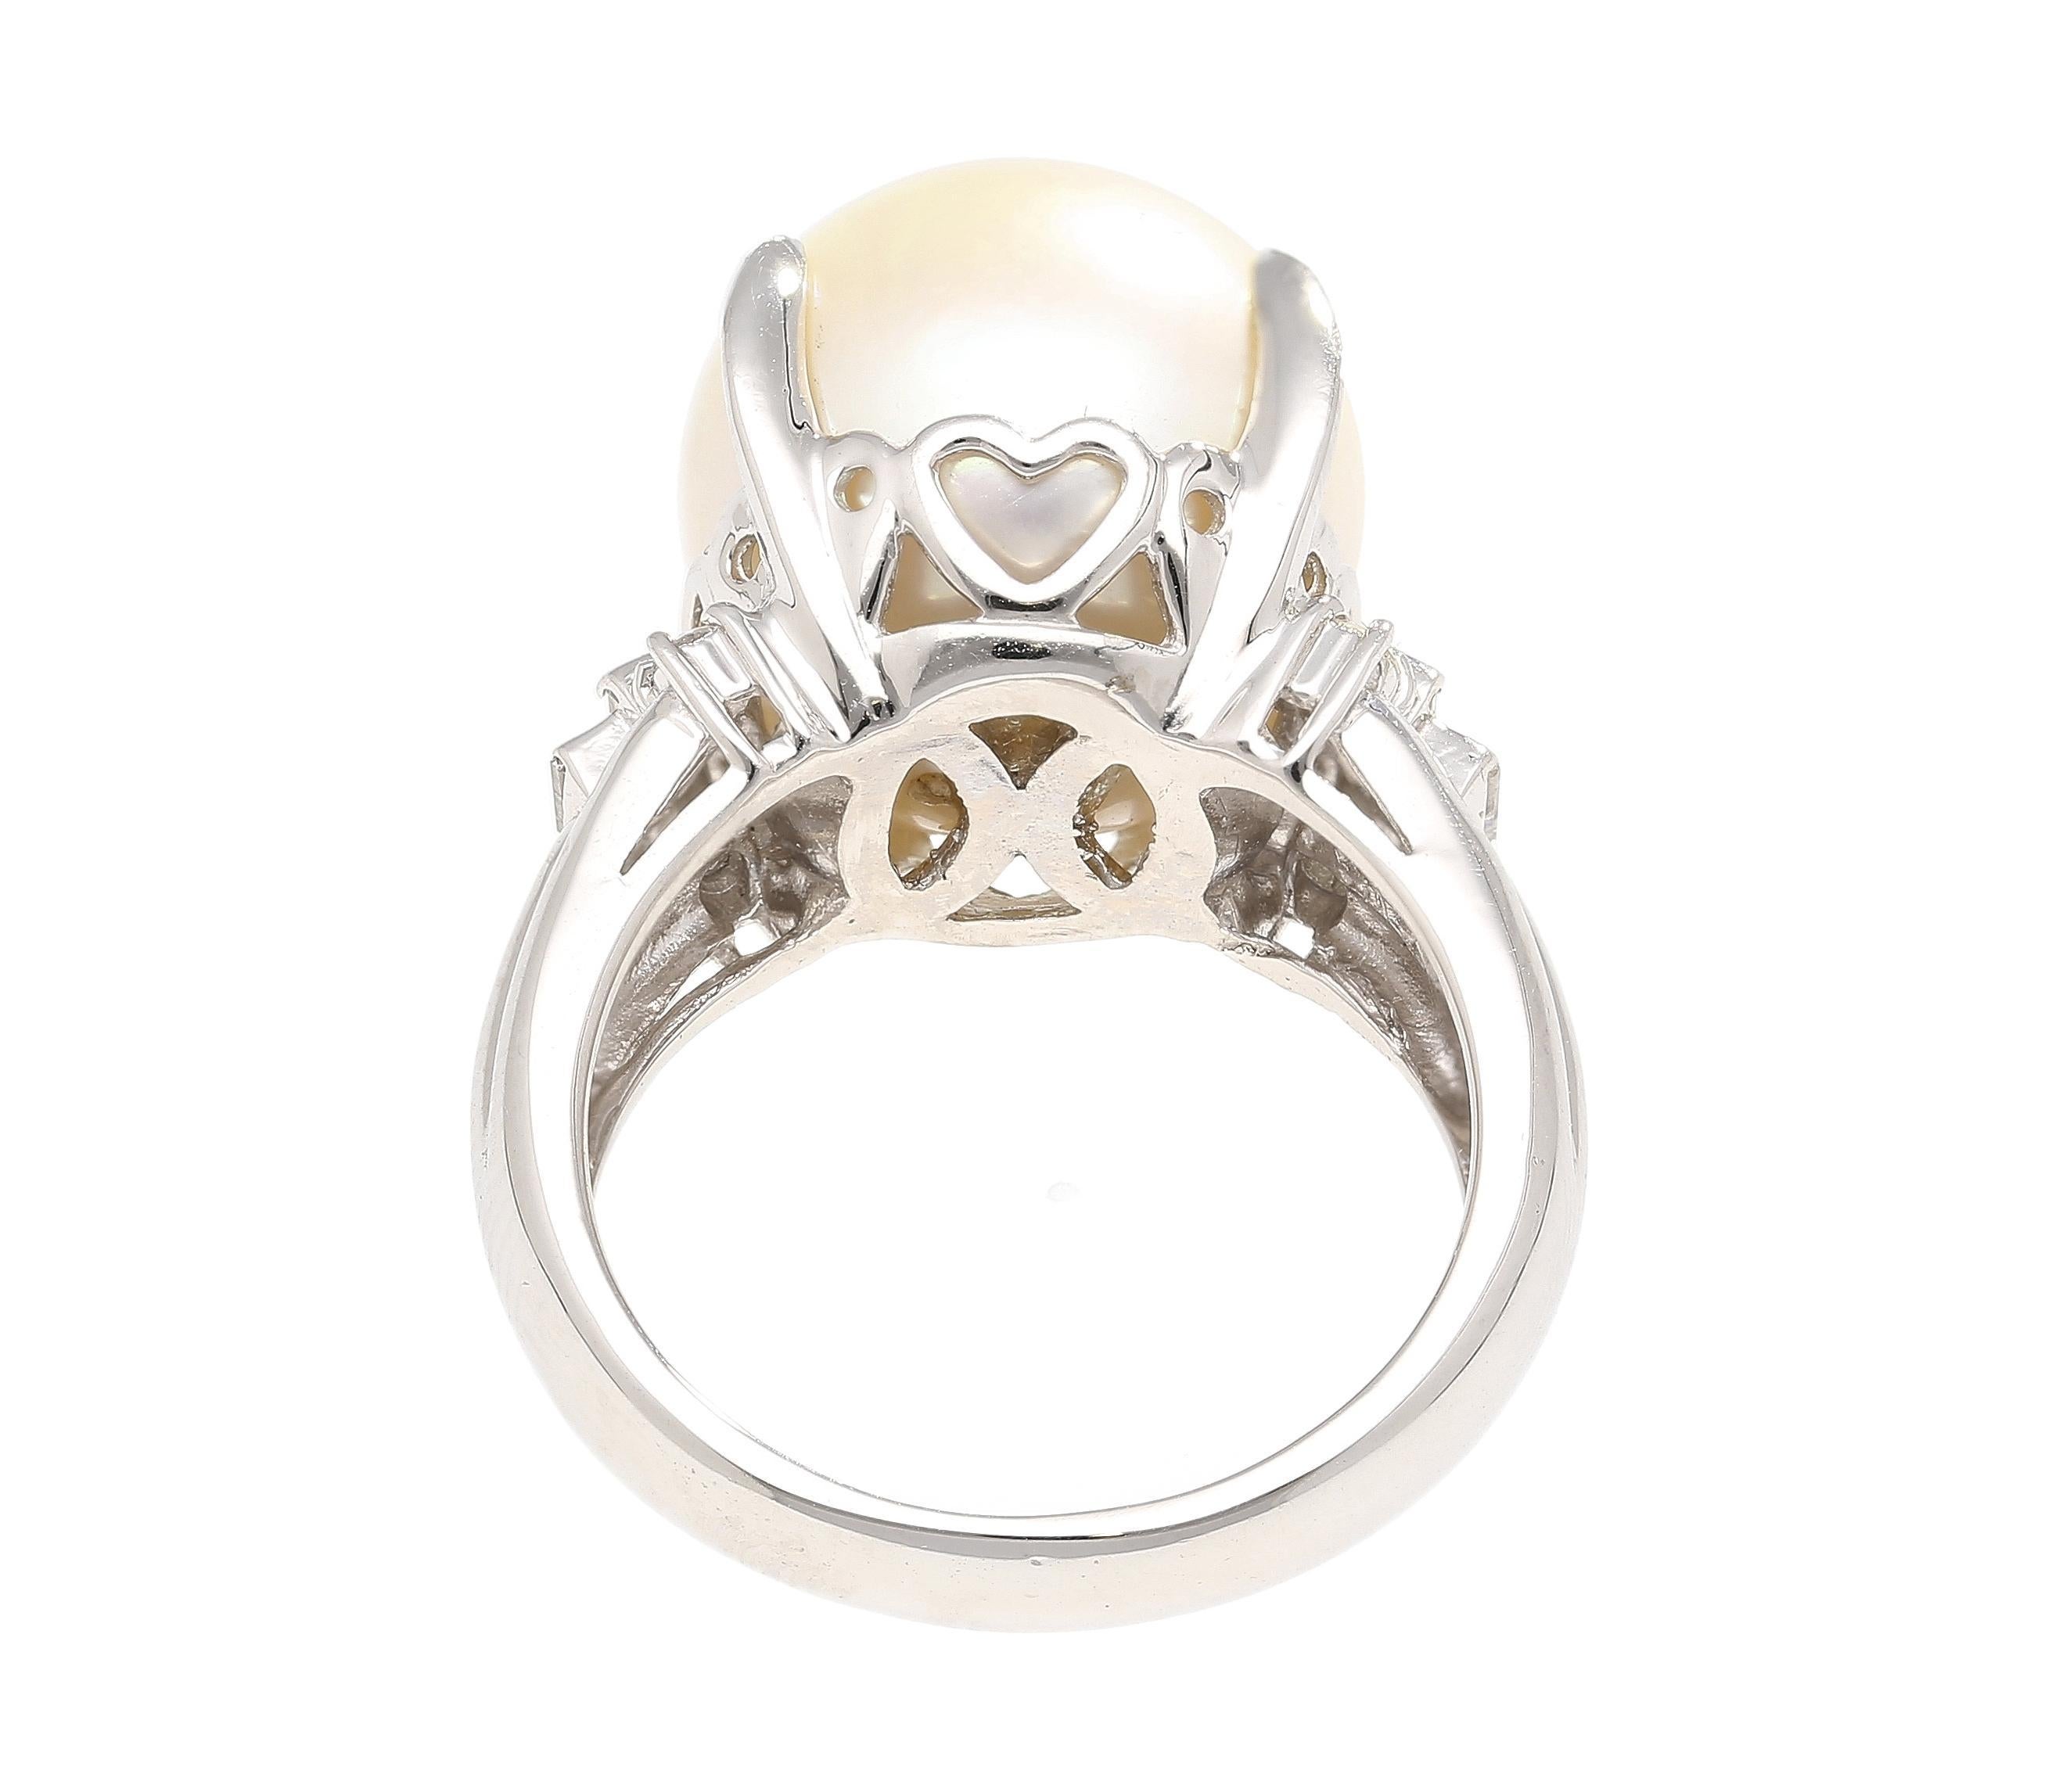 Baguette Cut 15mm South Sea Pearl and Diamond Platinum Cocktail Ring with Heart Shape Design For Sale